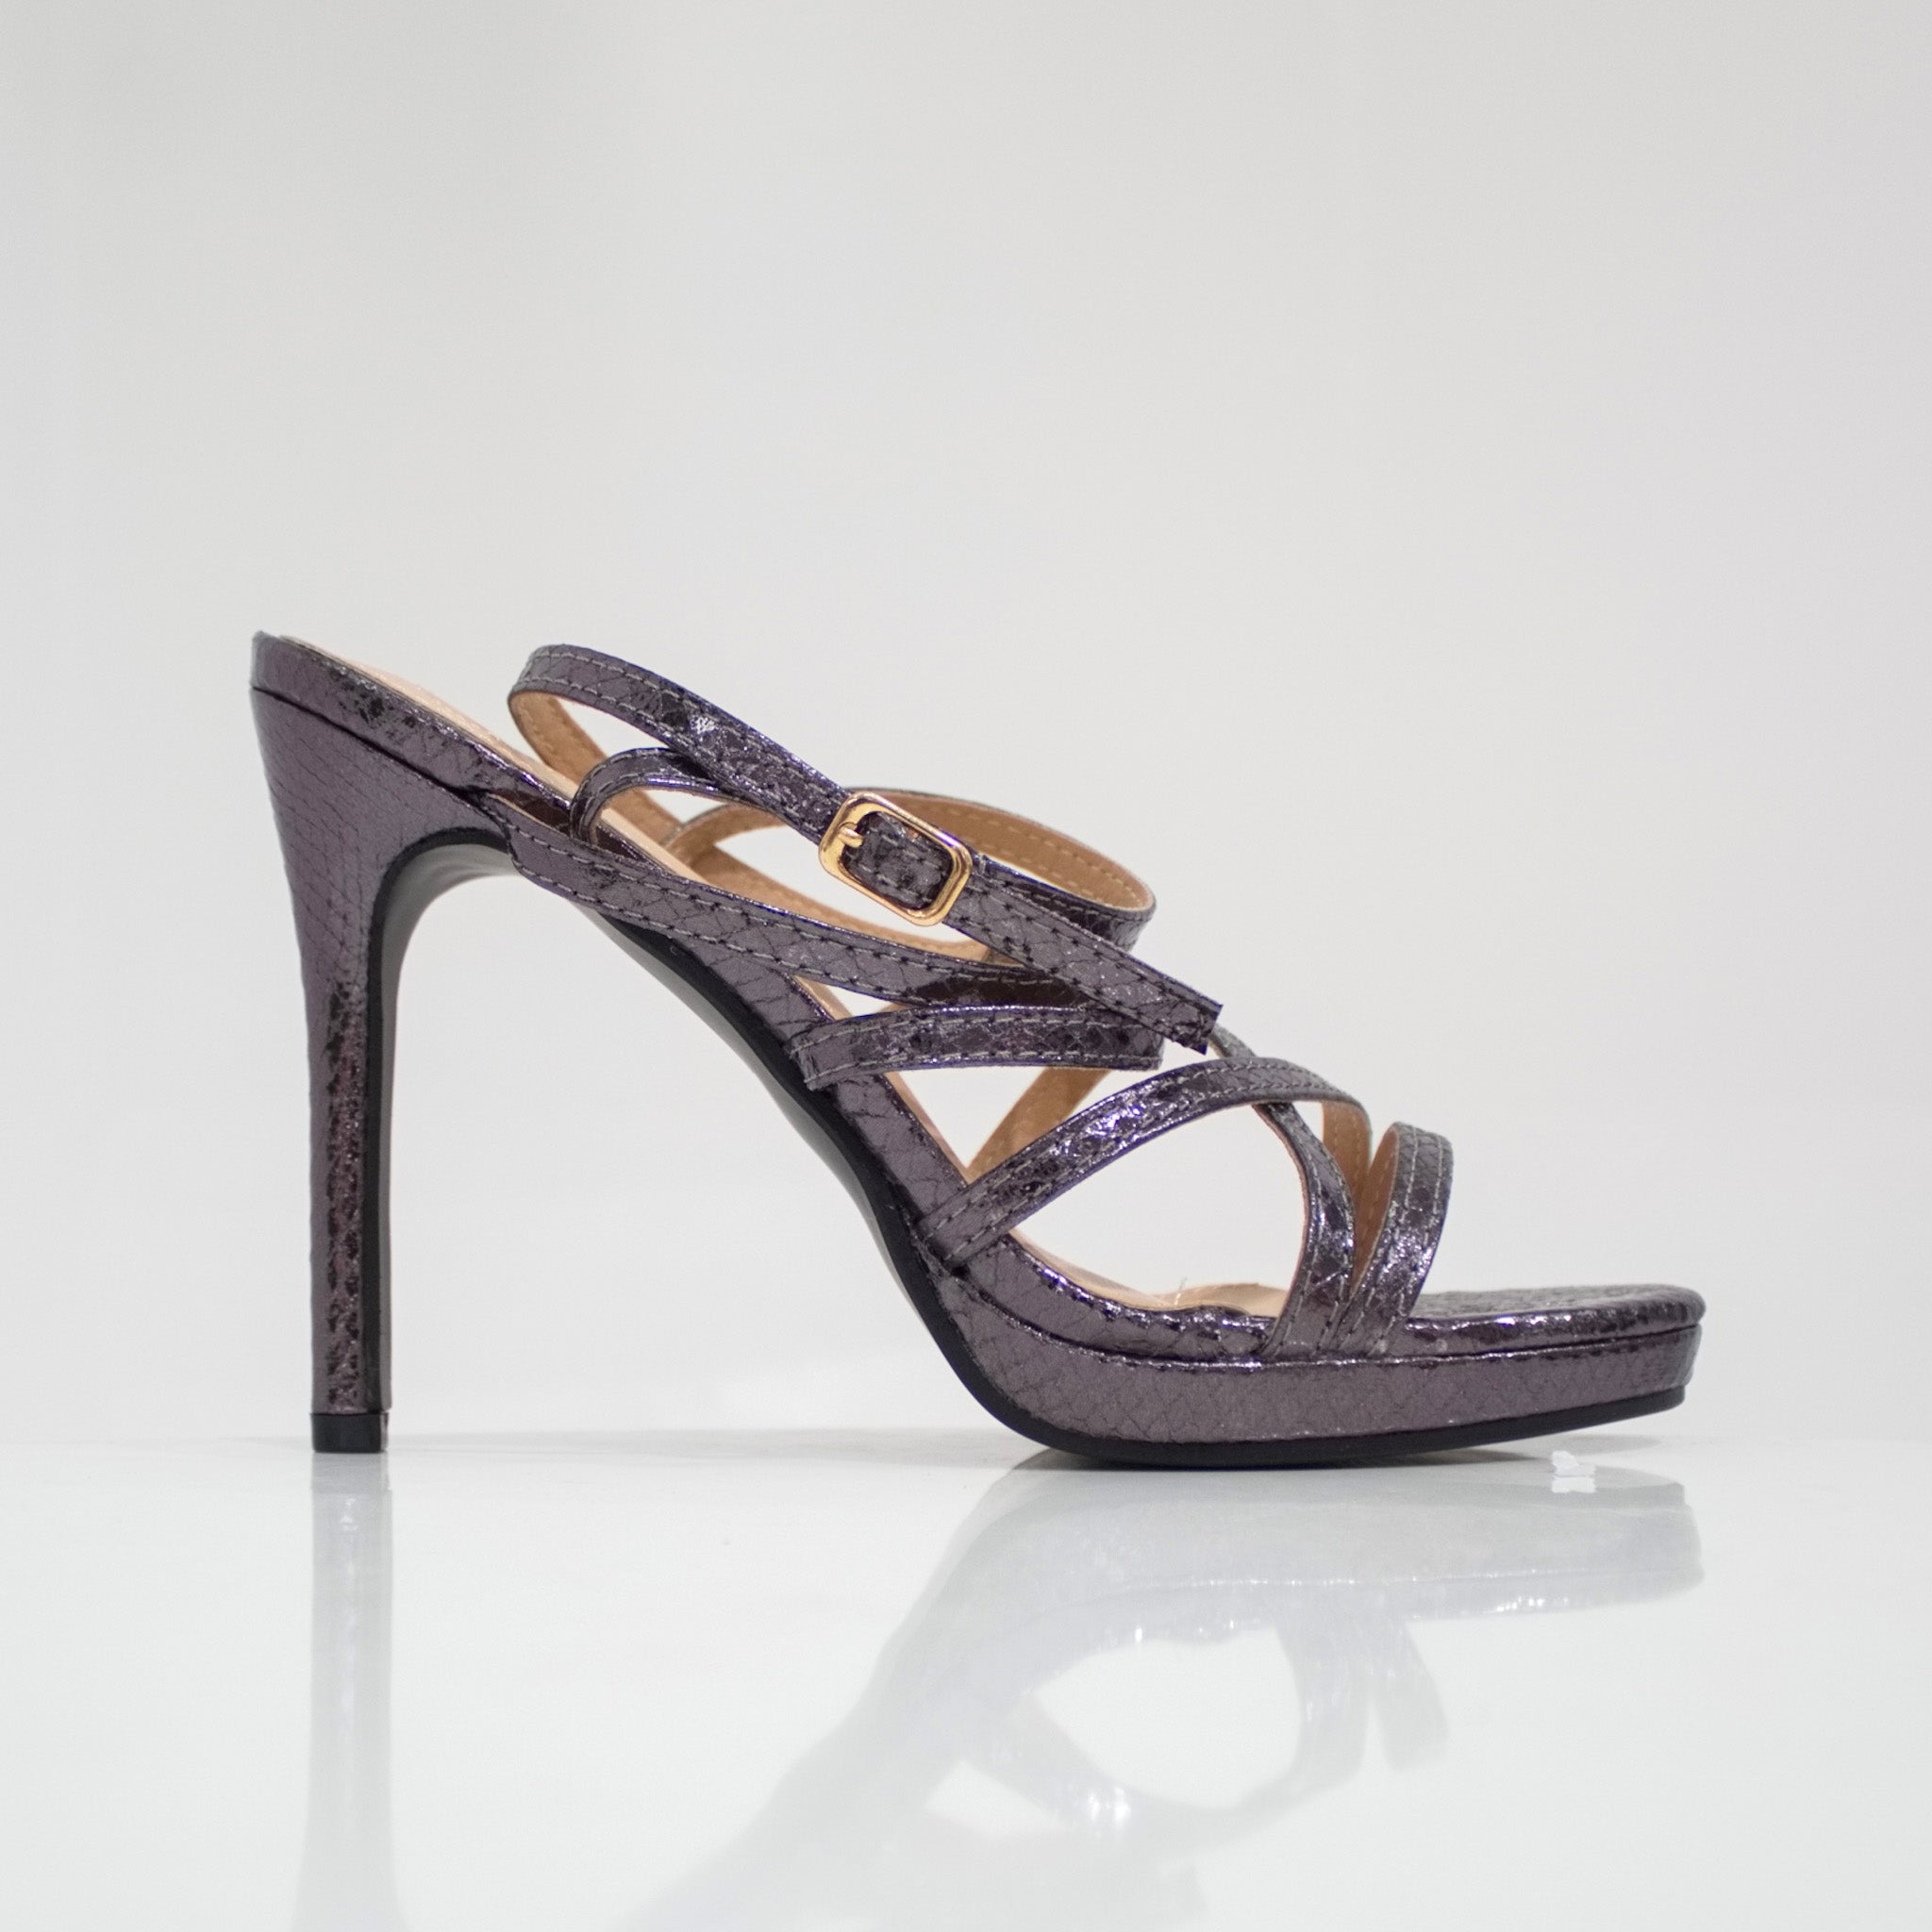 Nosipho strappy ankle strap sandal on a 11cm heel pewter